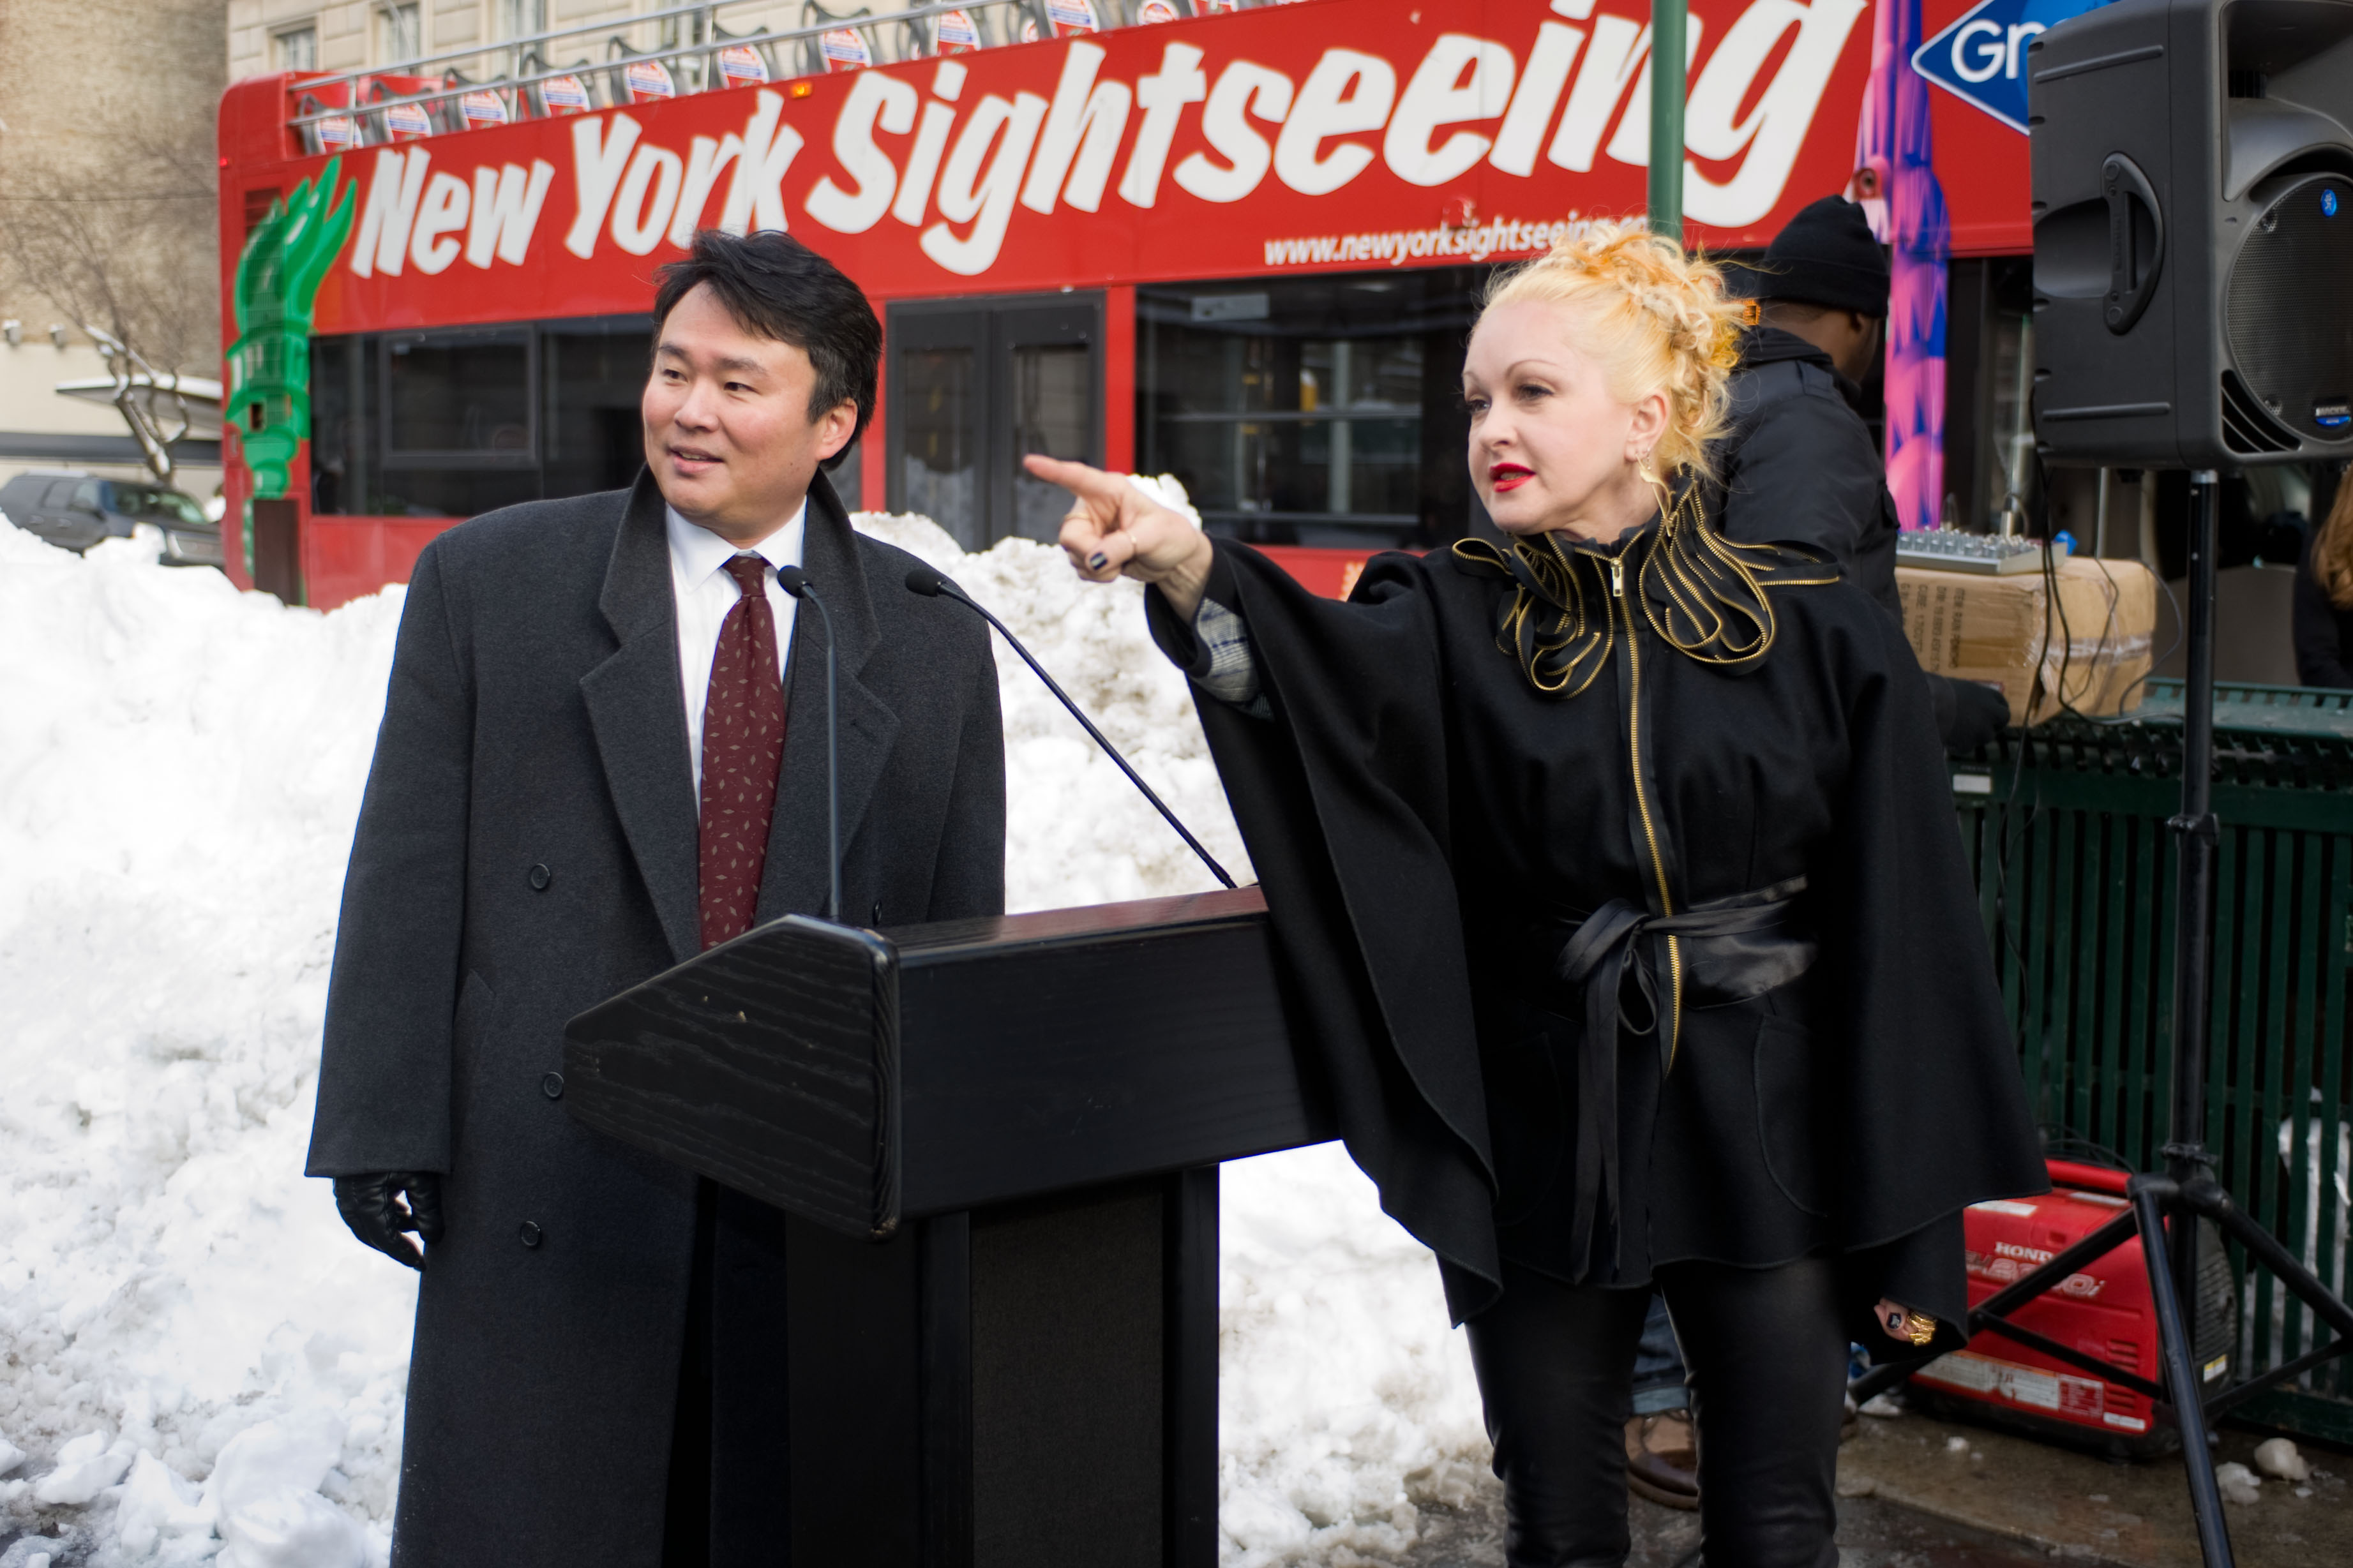 David W. Chien with Ride of Fame Honoree Cyndi Lauper (January 27th, 2011).